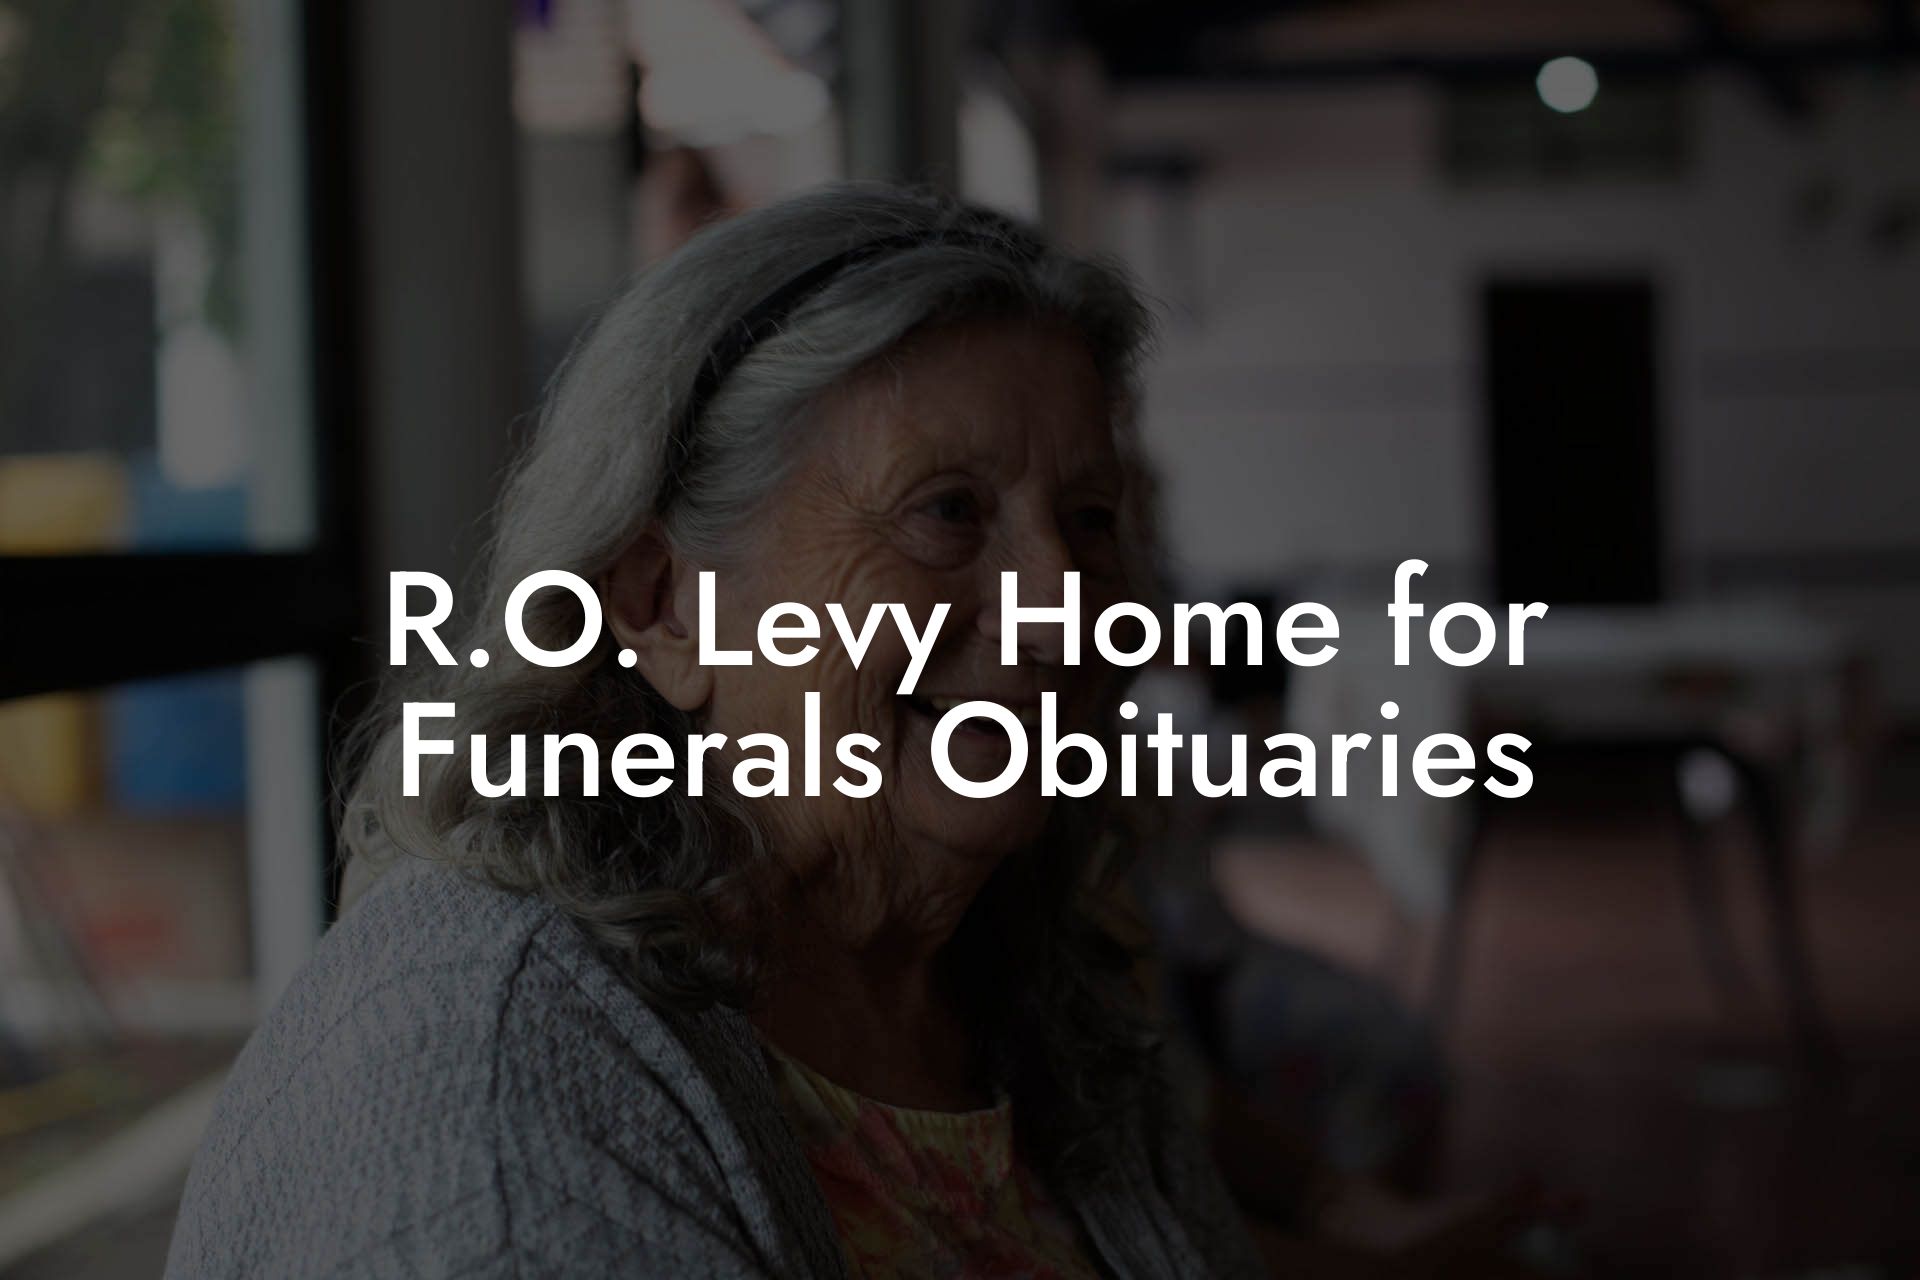 R.O. Levy Home for Funerals Obituaries